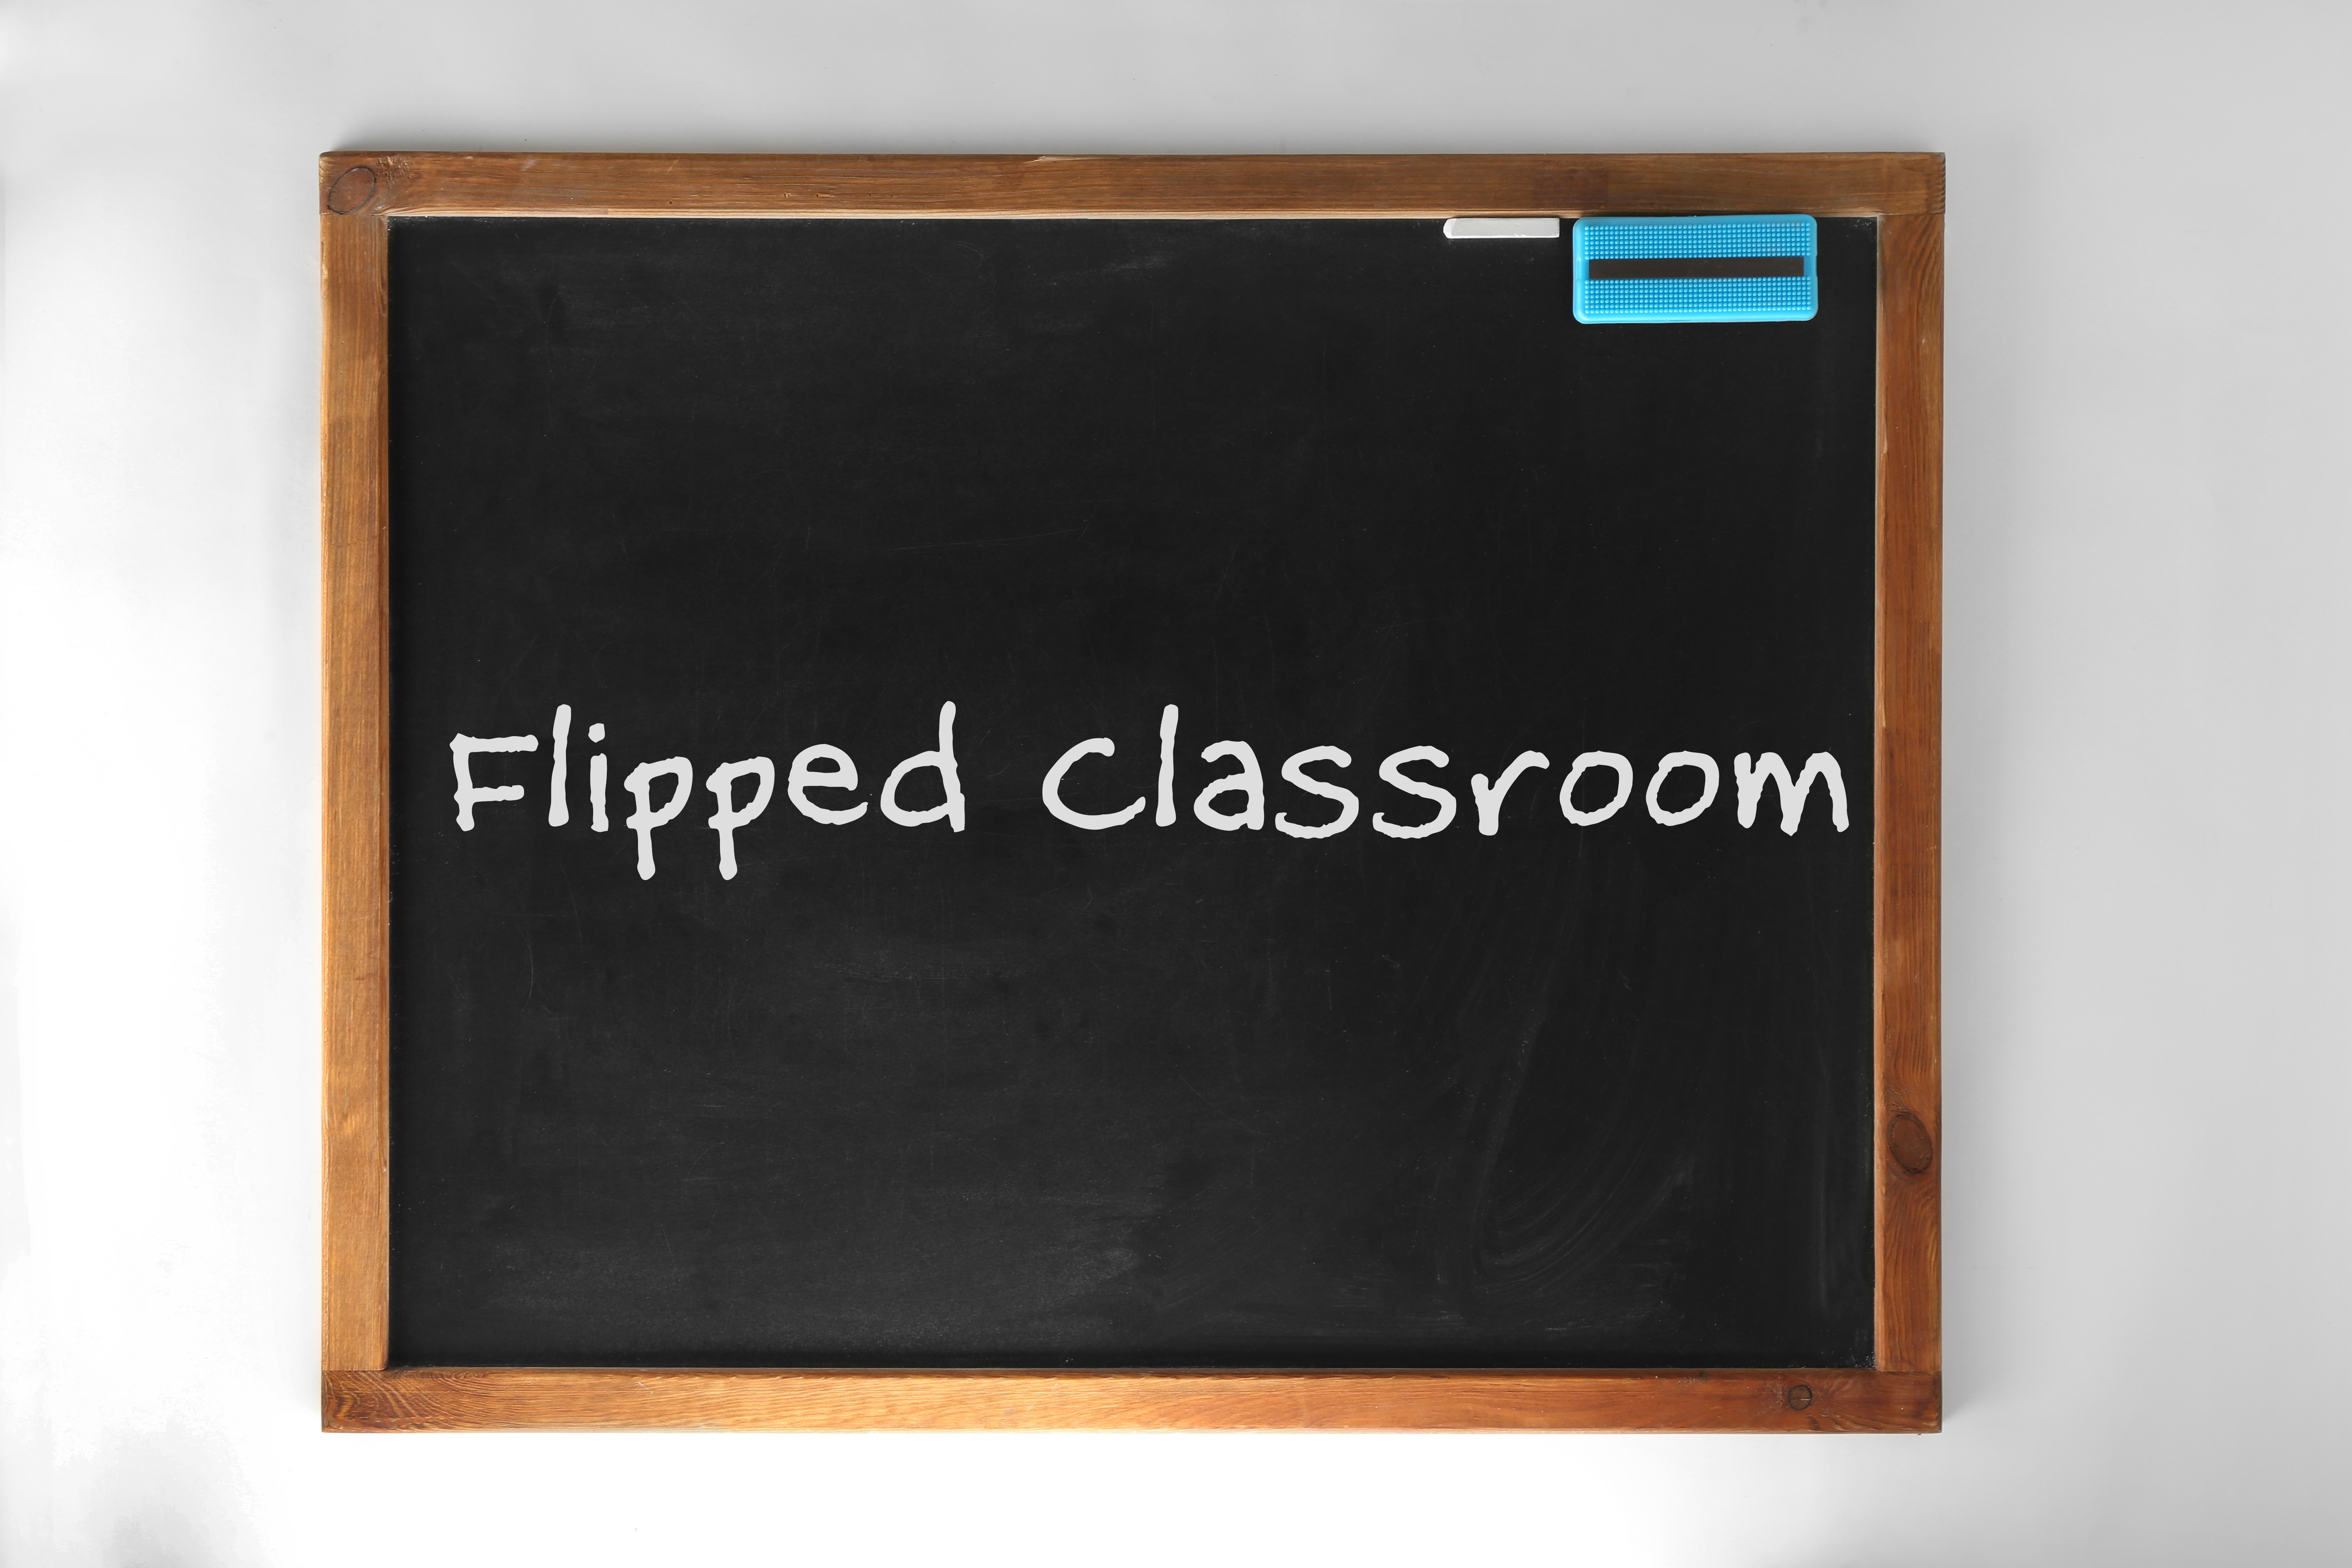 Flipped classroom concept. Inversed blackboard on white background